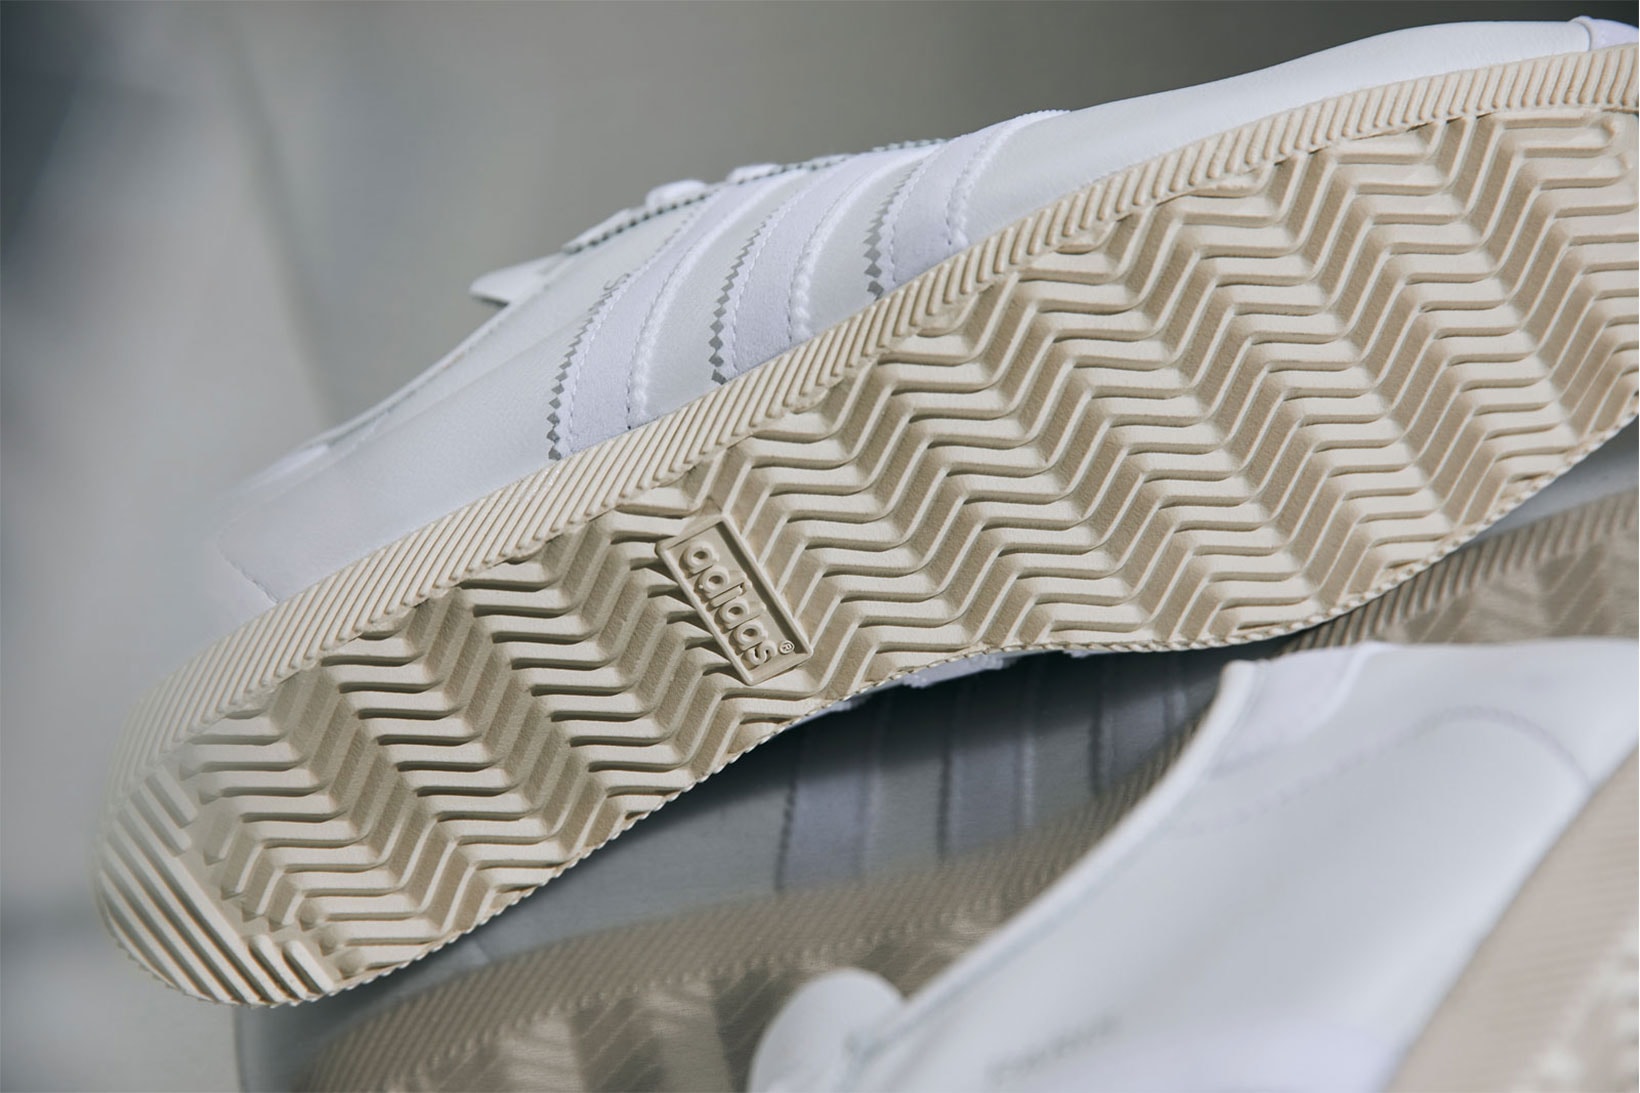 adidas paris og white end exclusive limited edition release date info